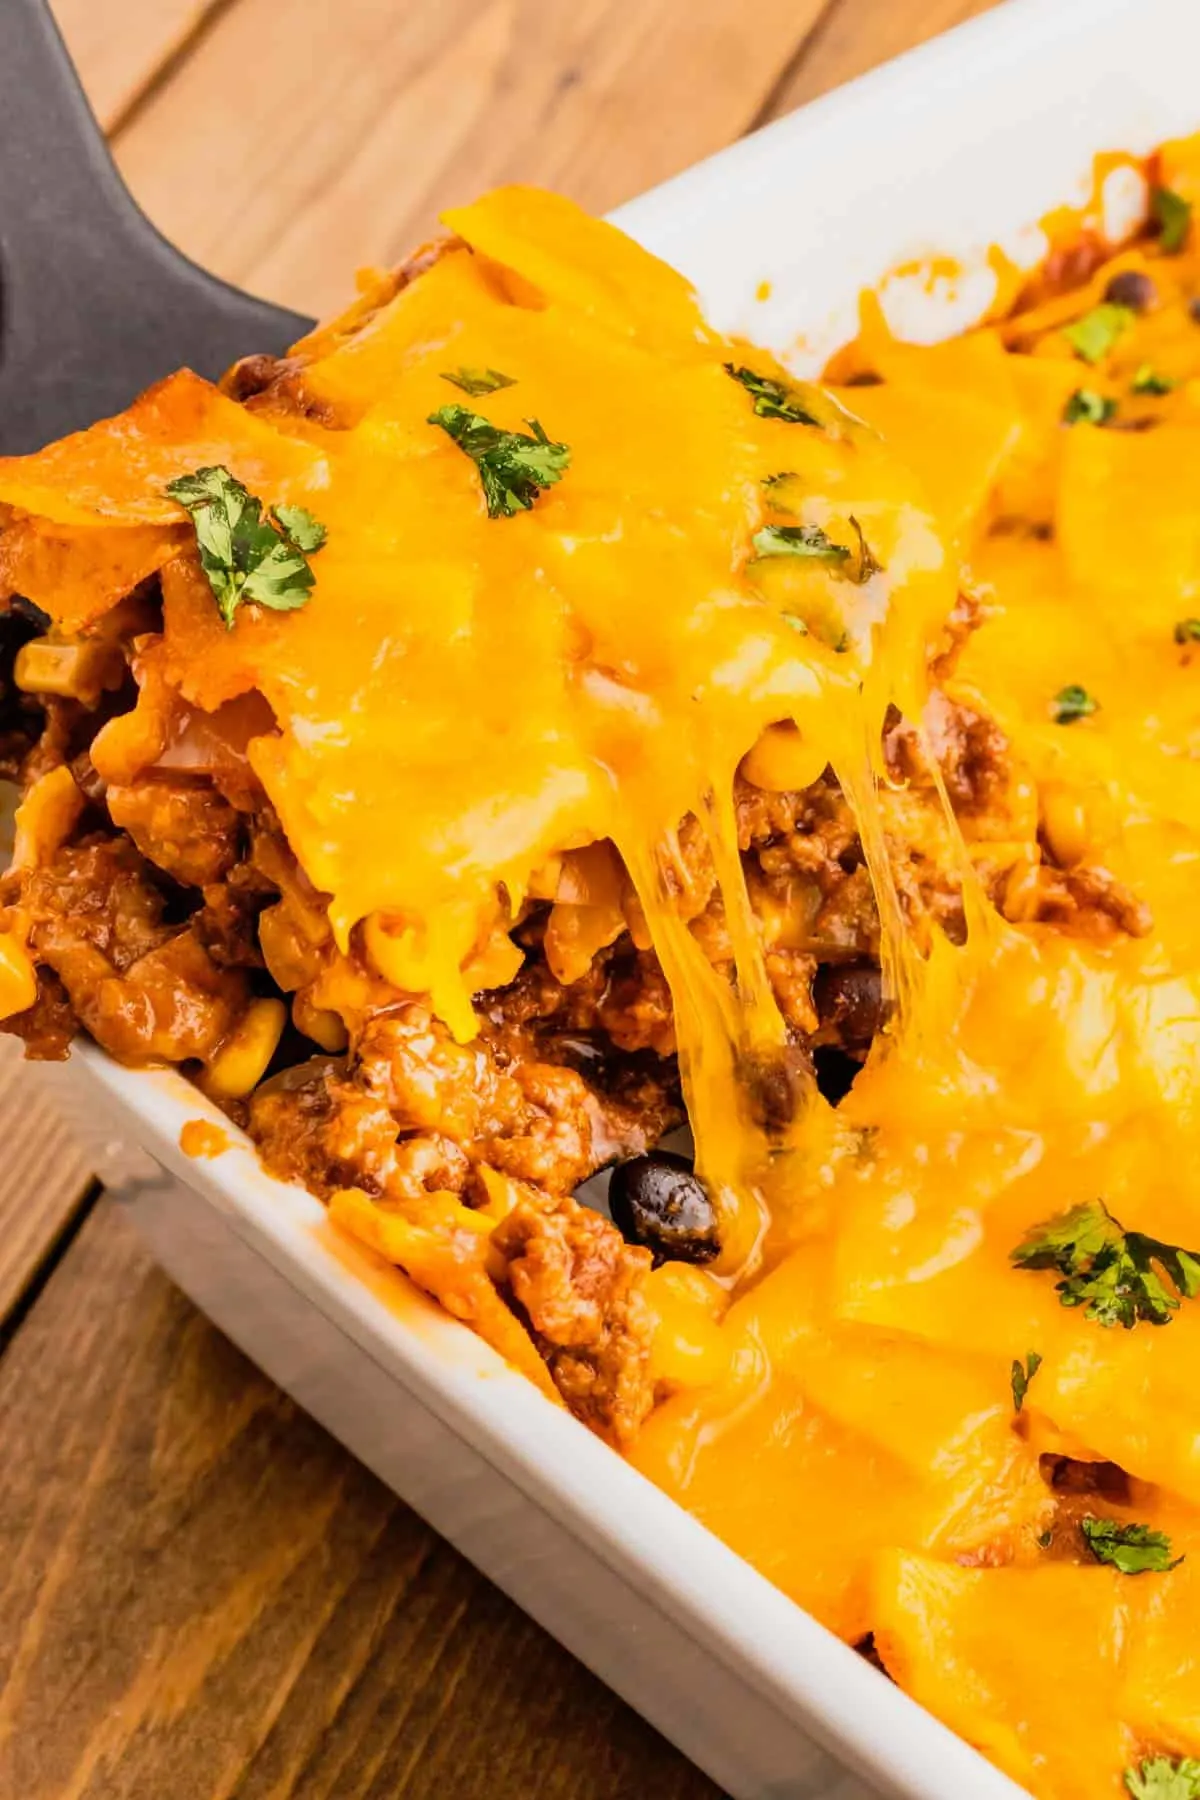 Beef Enchilada Casserole is an easy ground beef casserole recipe loaded with corn, black beans, corn tortillas, enchilada sauce and cheddar cheese.